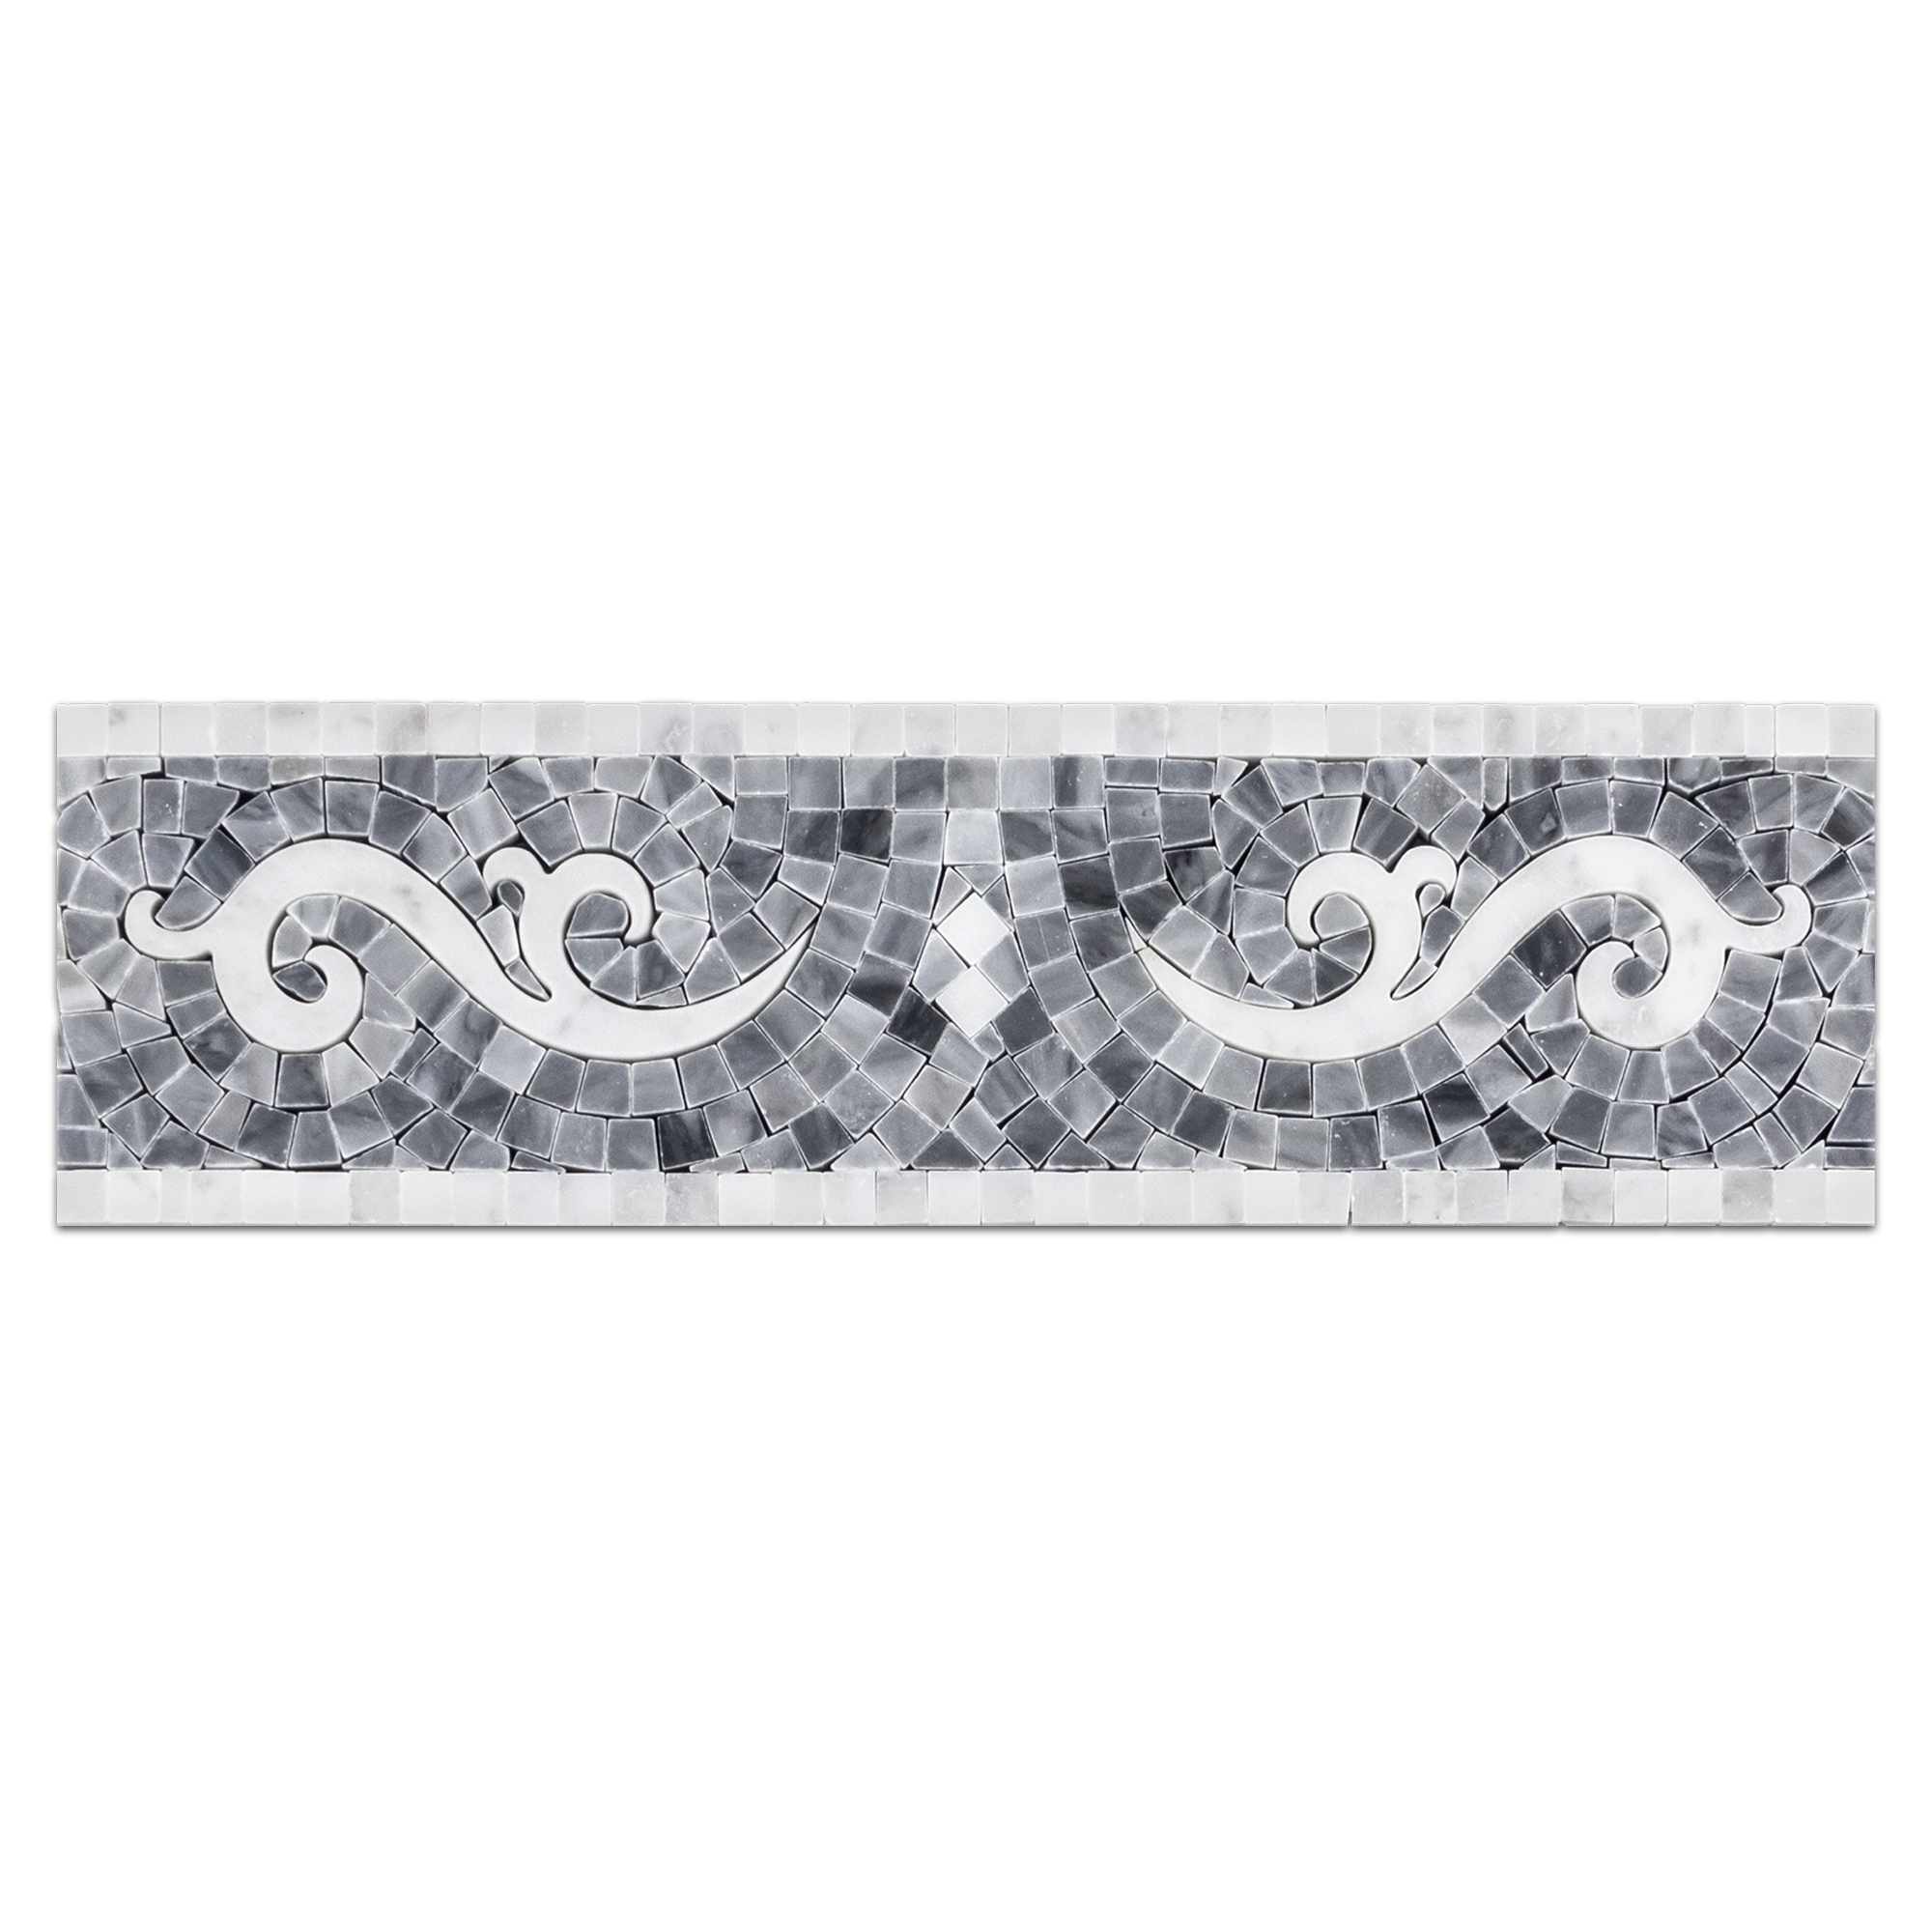 Alt text: "Elon Bardiglio Nuvolato and Bianco Carrara marble scroll border mosaic, 3.75x12.25 inches, polished finish, available at Surface Group International."